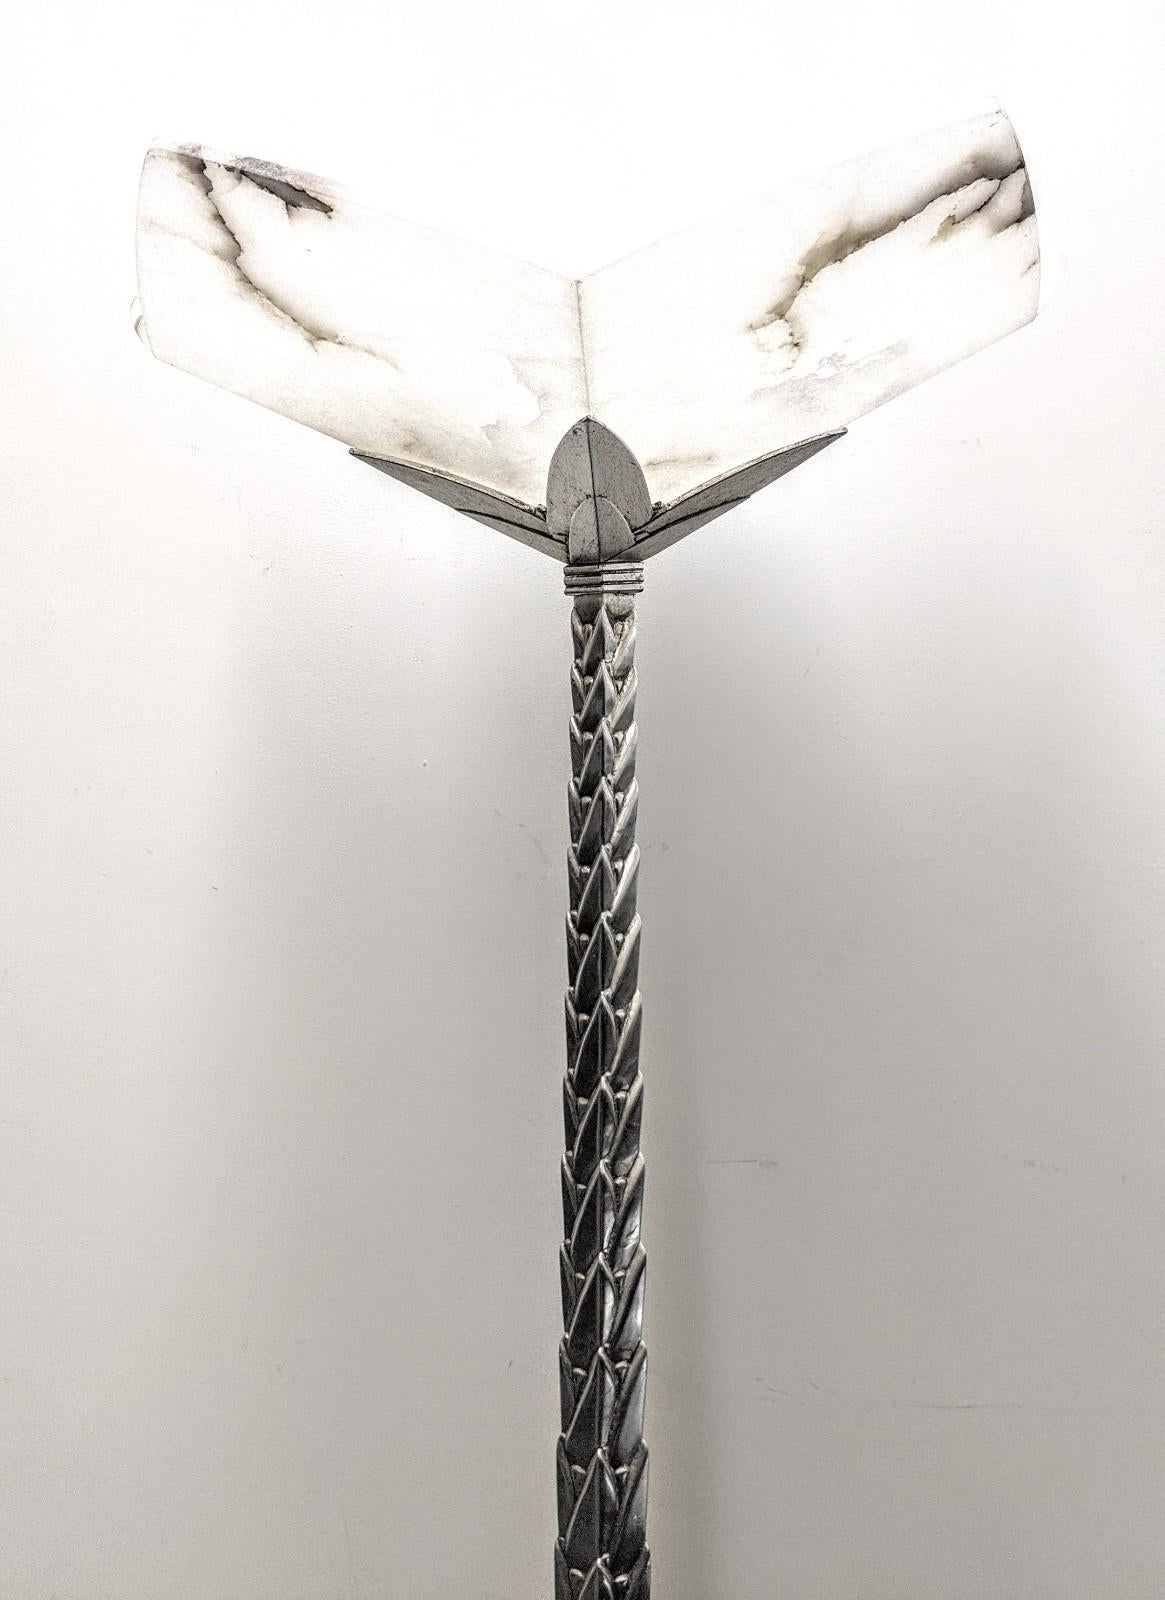 Stunning French Art Deco torchère, floor lamp with a fluted stem of Palm Tree Design in silver with Alabaster shade. The lamp has been rewired for U.S. standards, with a household bulb E-26 medium base (300 Watt max.) Measures: 77” High x 25”